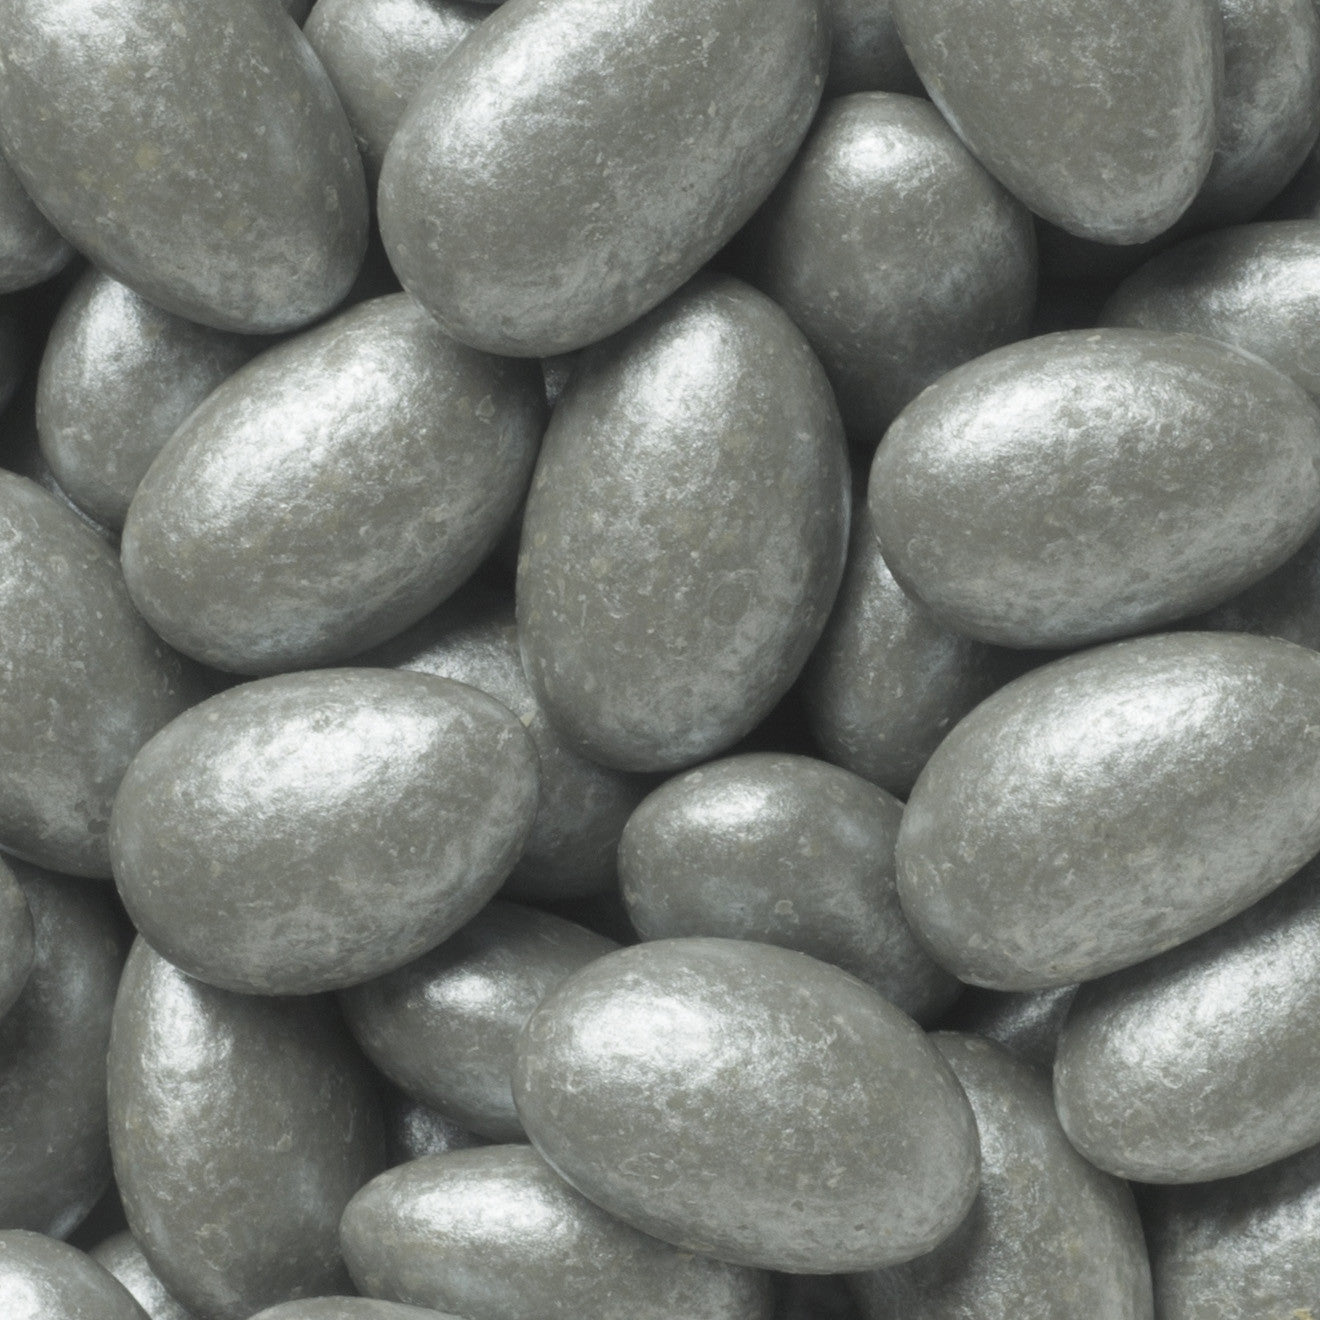 Lustrous Silver French Almonds